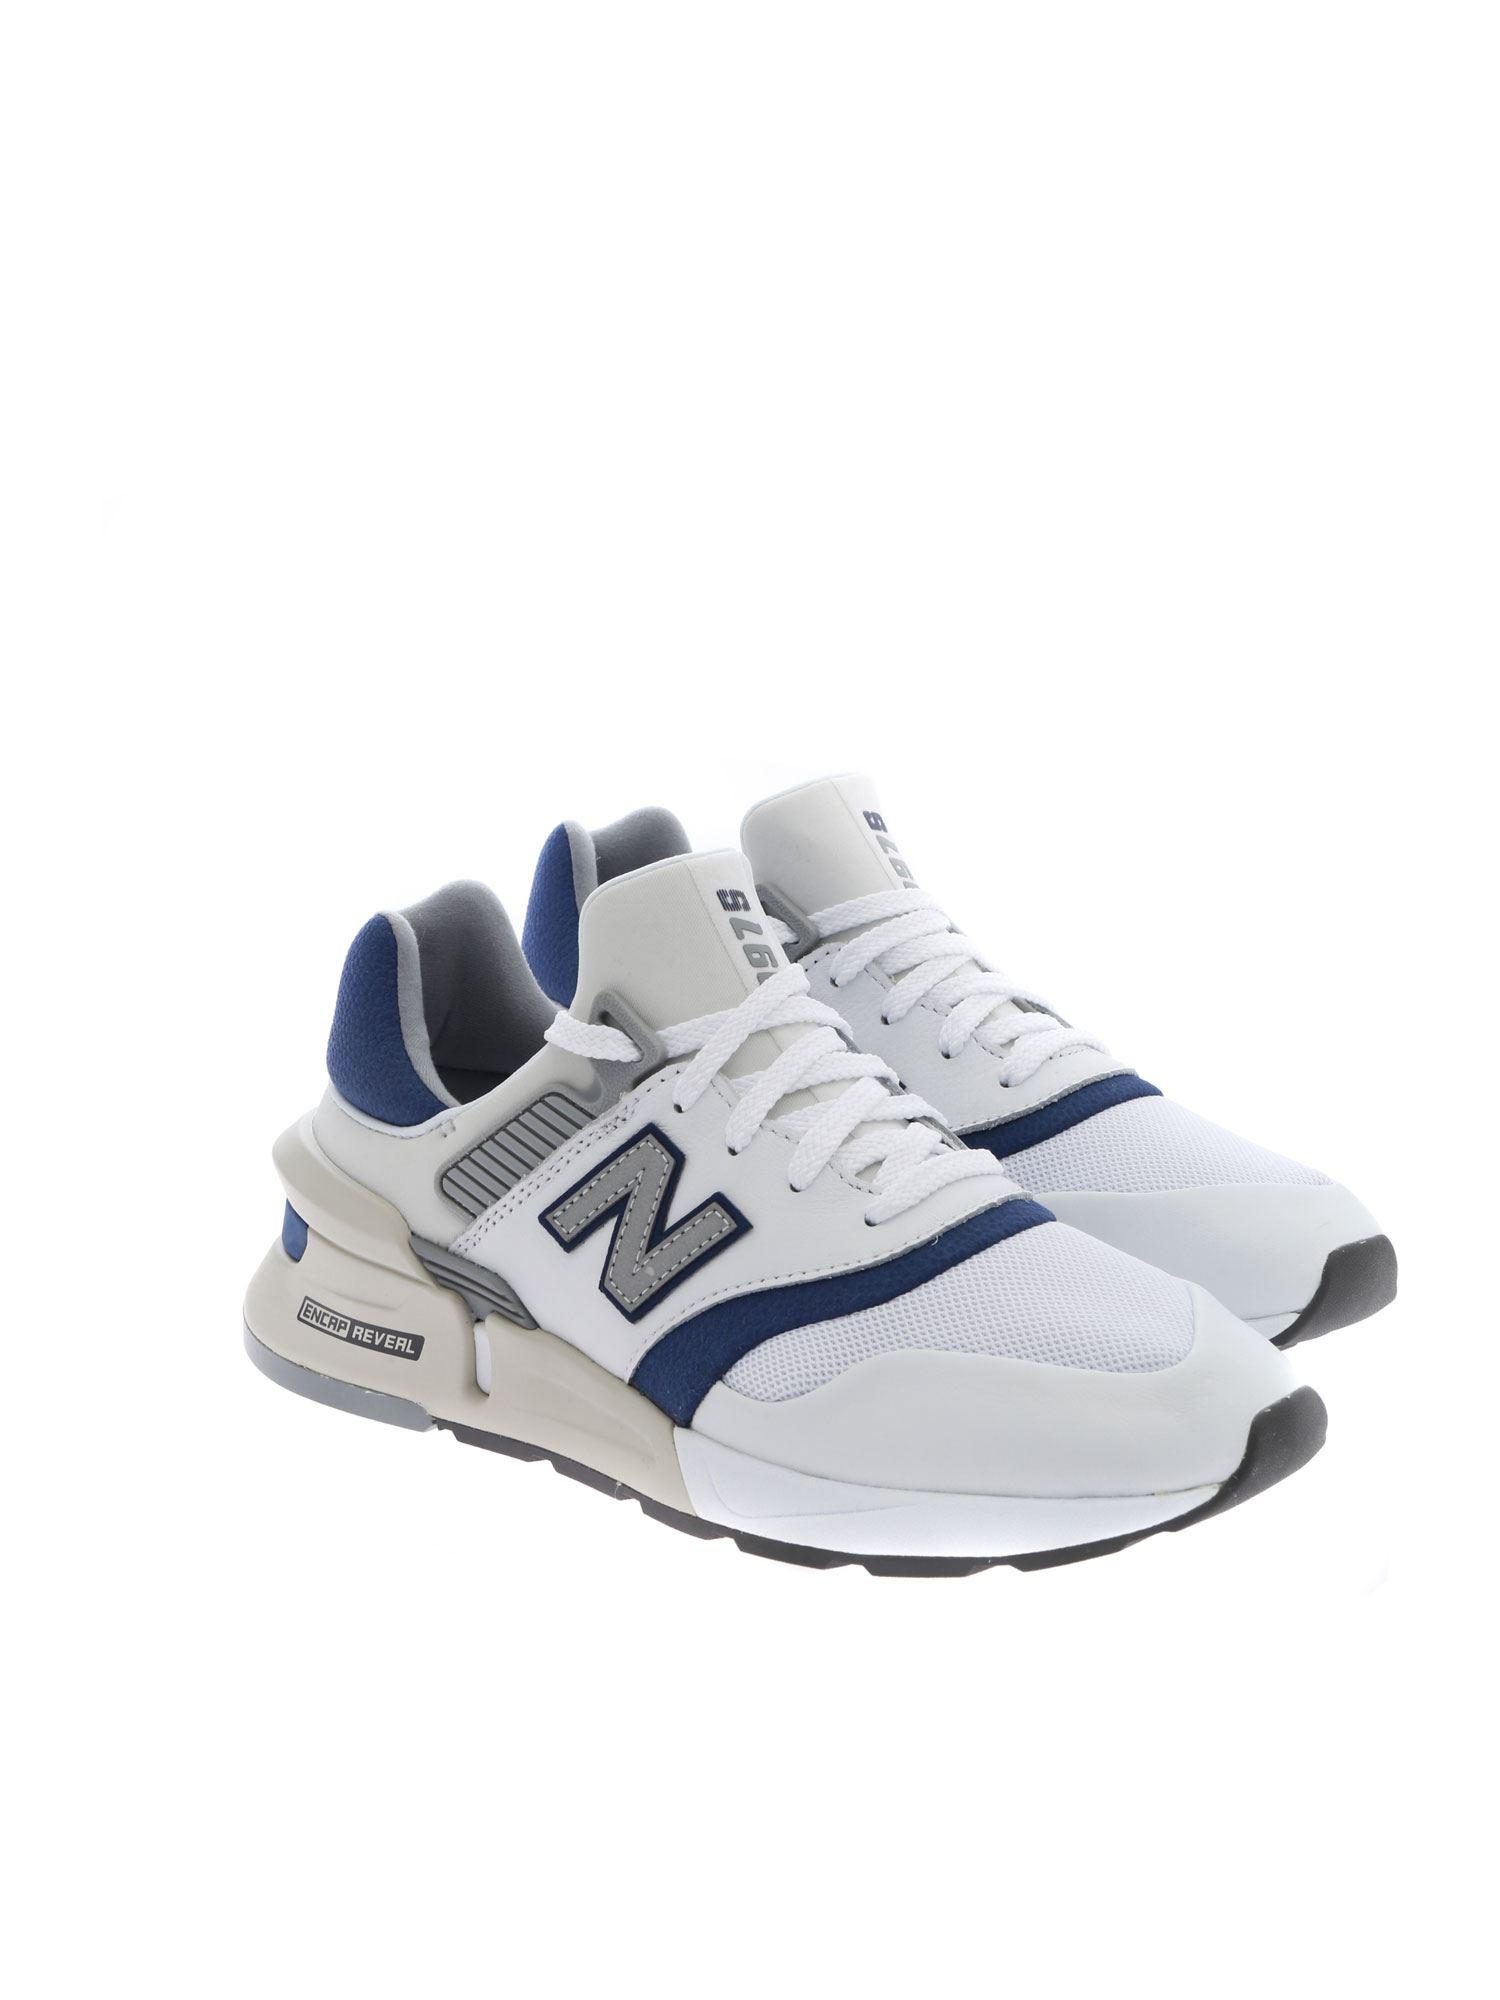  New  Balance  Synthetic Encap  Reveal  Sneakers in White for 